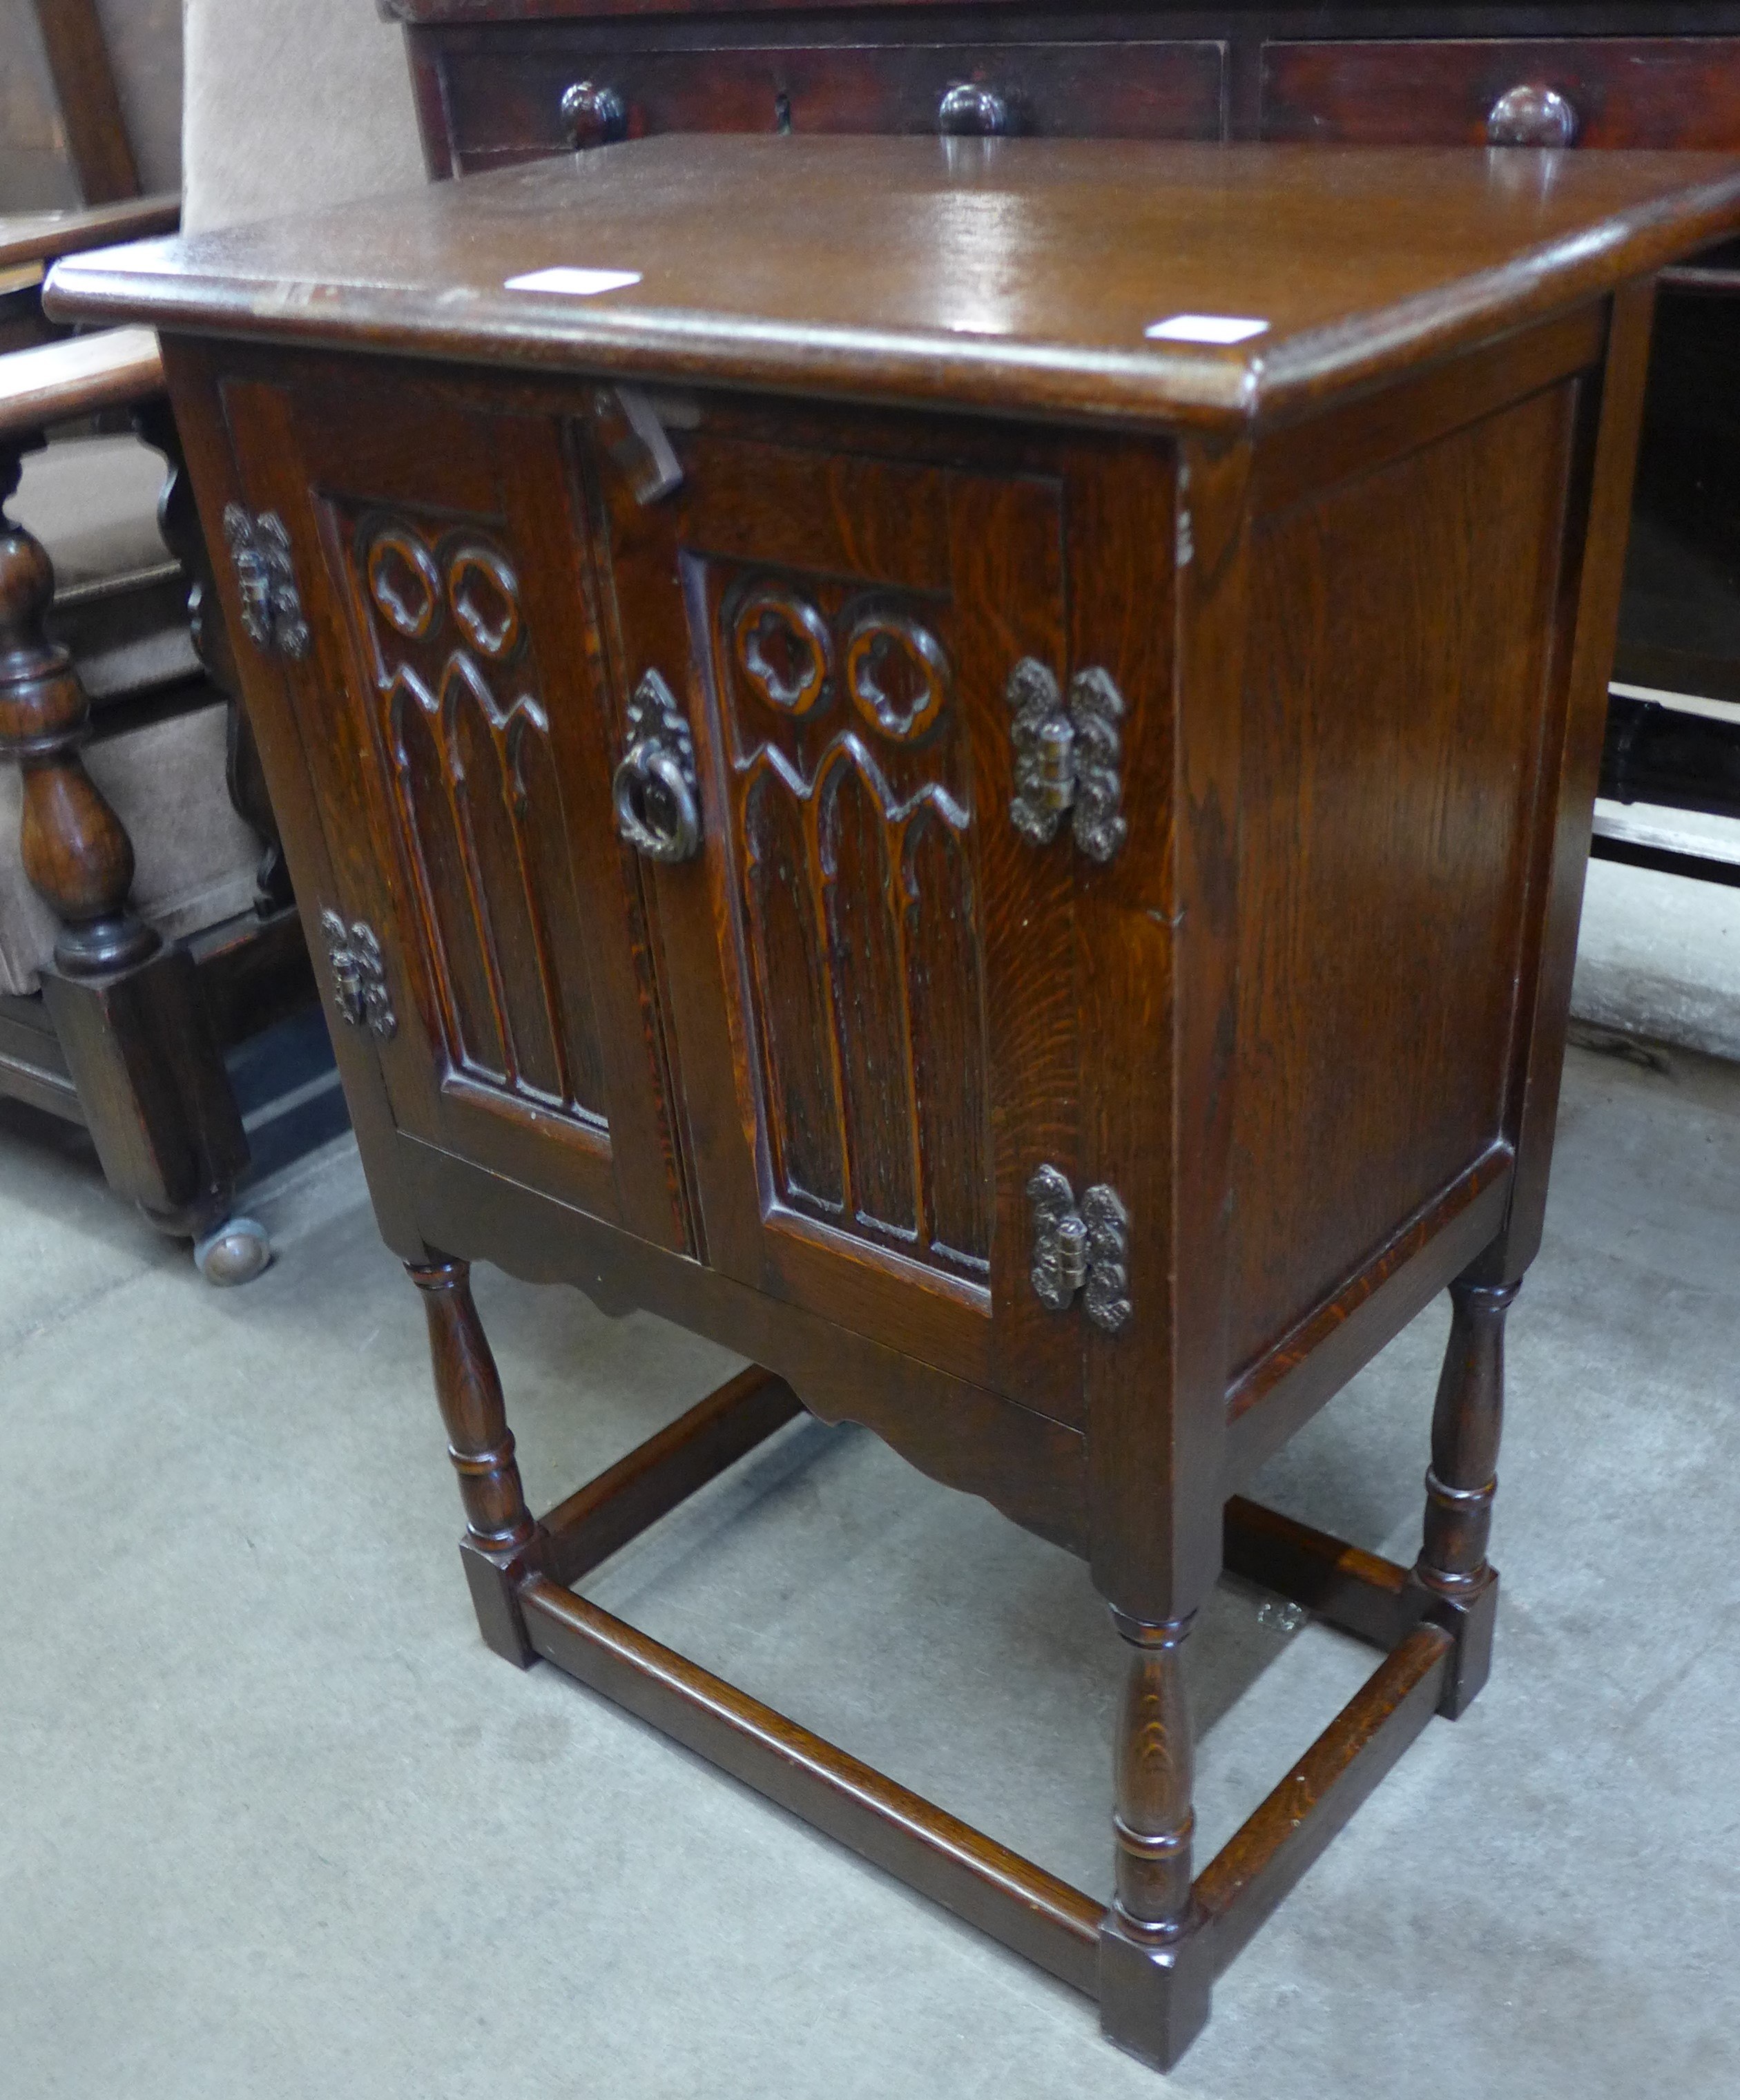 A small 17th Century style carved oak cupboard